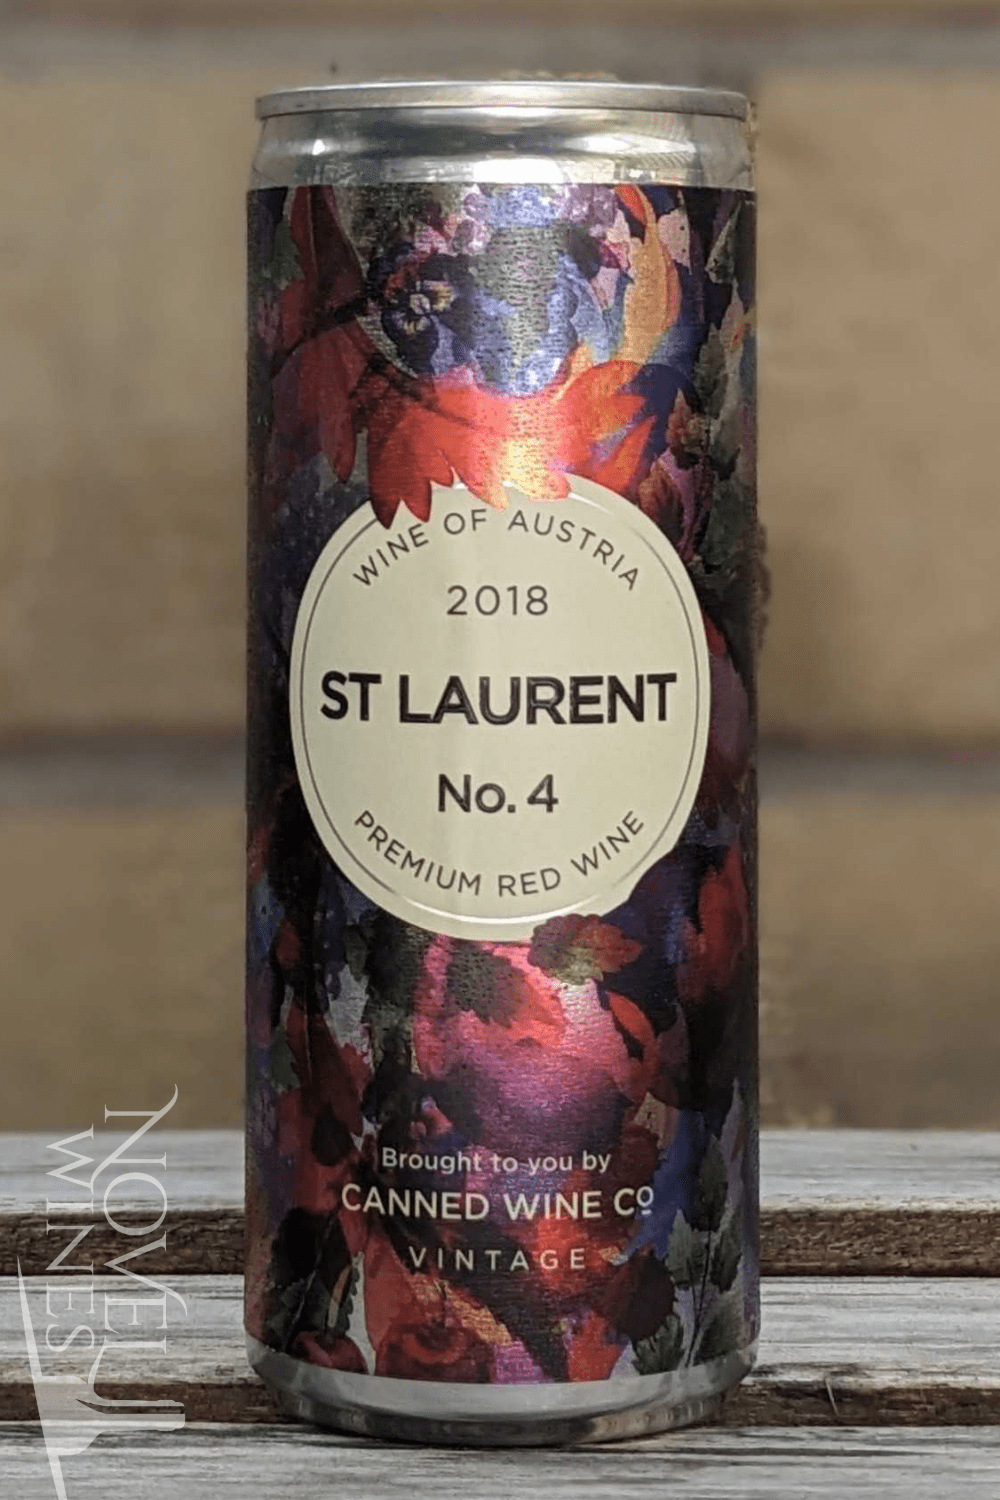 Canned Wine Co Red Wine Canned Wine Co. Vintage St Laurent 2018, Austria